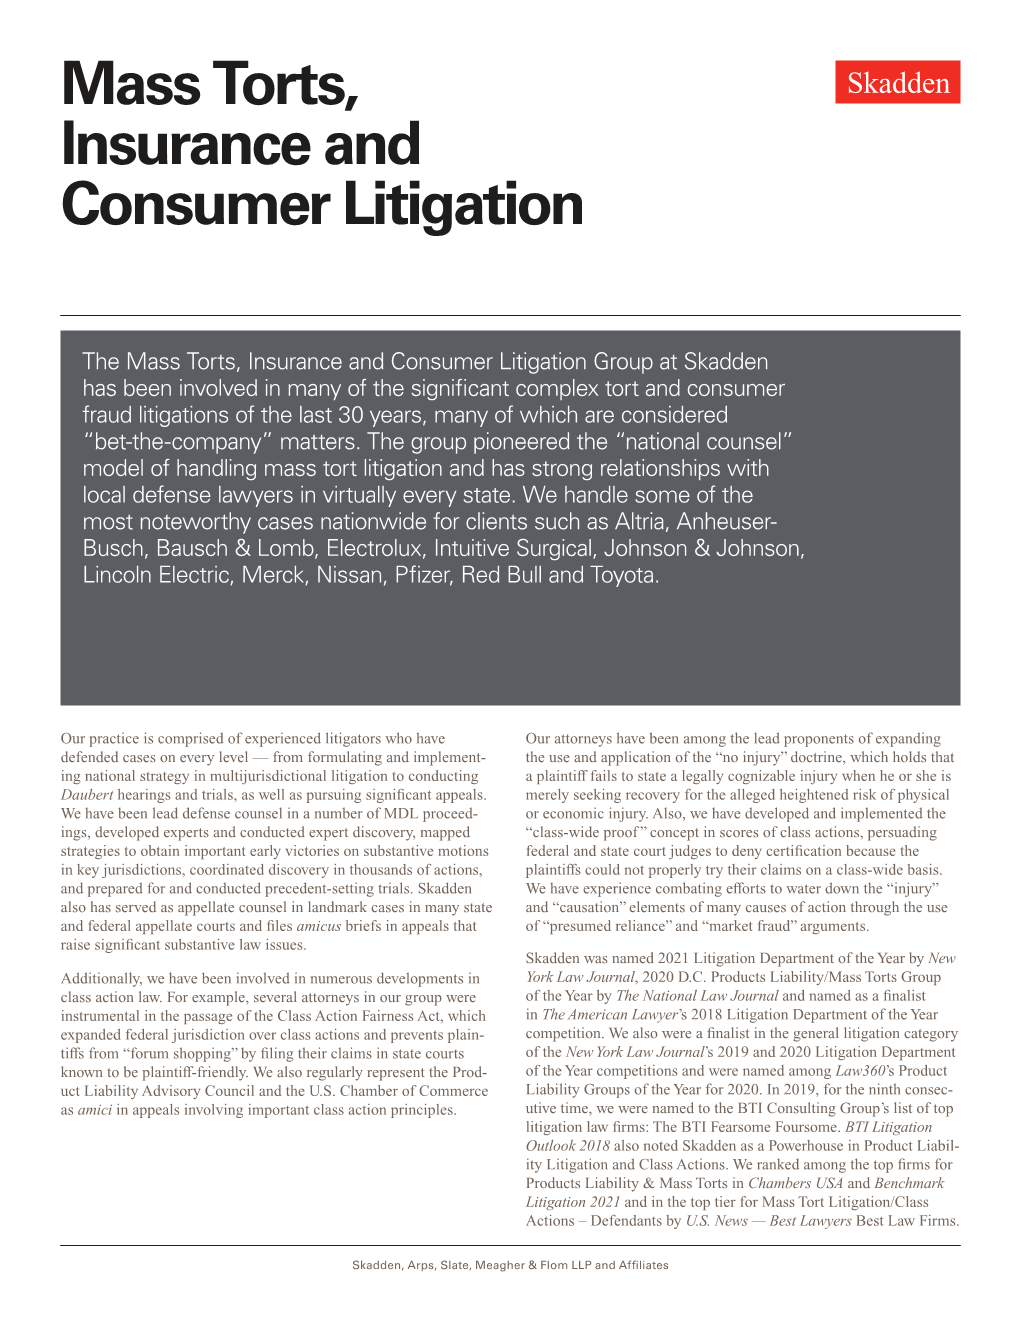 Mass Torts, Insurance and Consumer Litigation